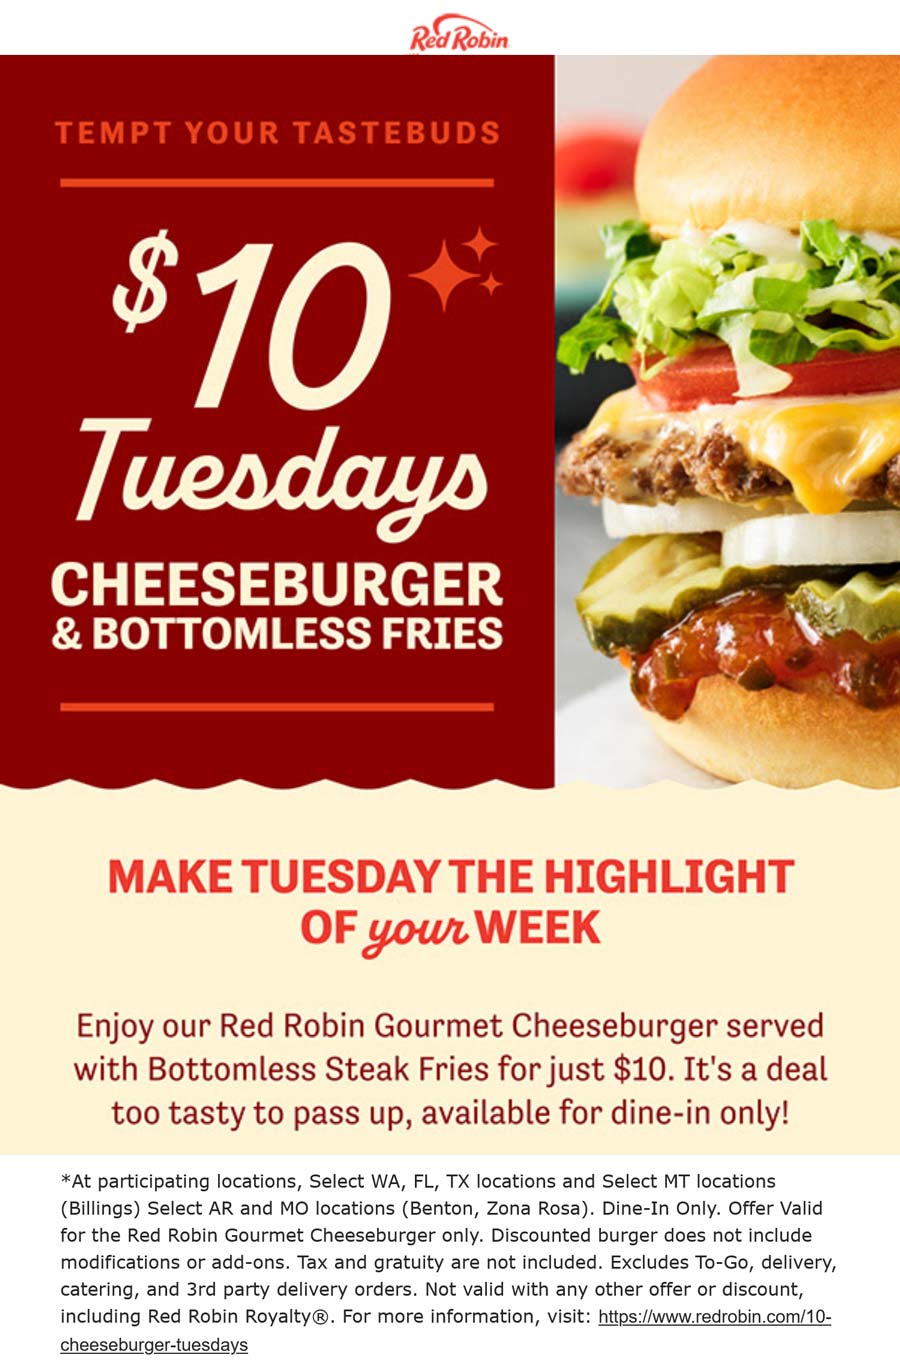 Ruby Tuesday restaurants Coupon  Gourmet cheeseburger + bottomless steak fries = $10 today at Ruby Tuesday #rubytuesday 